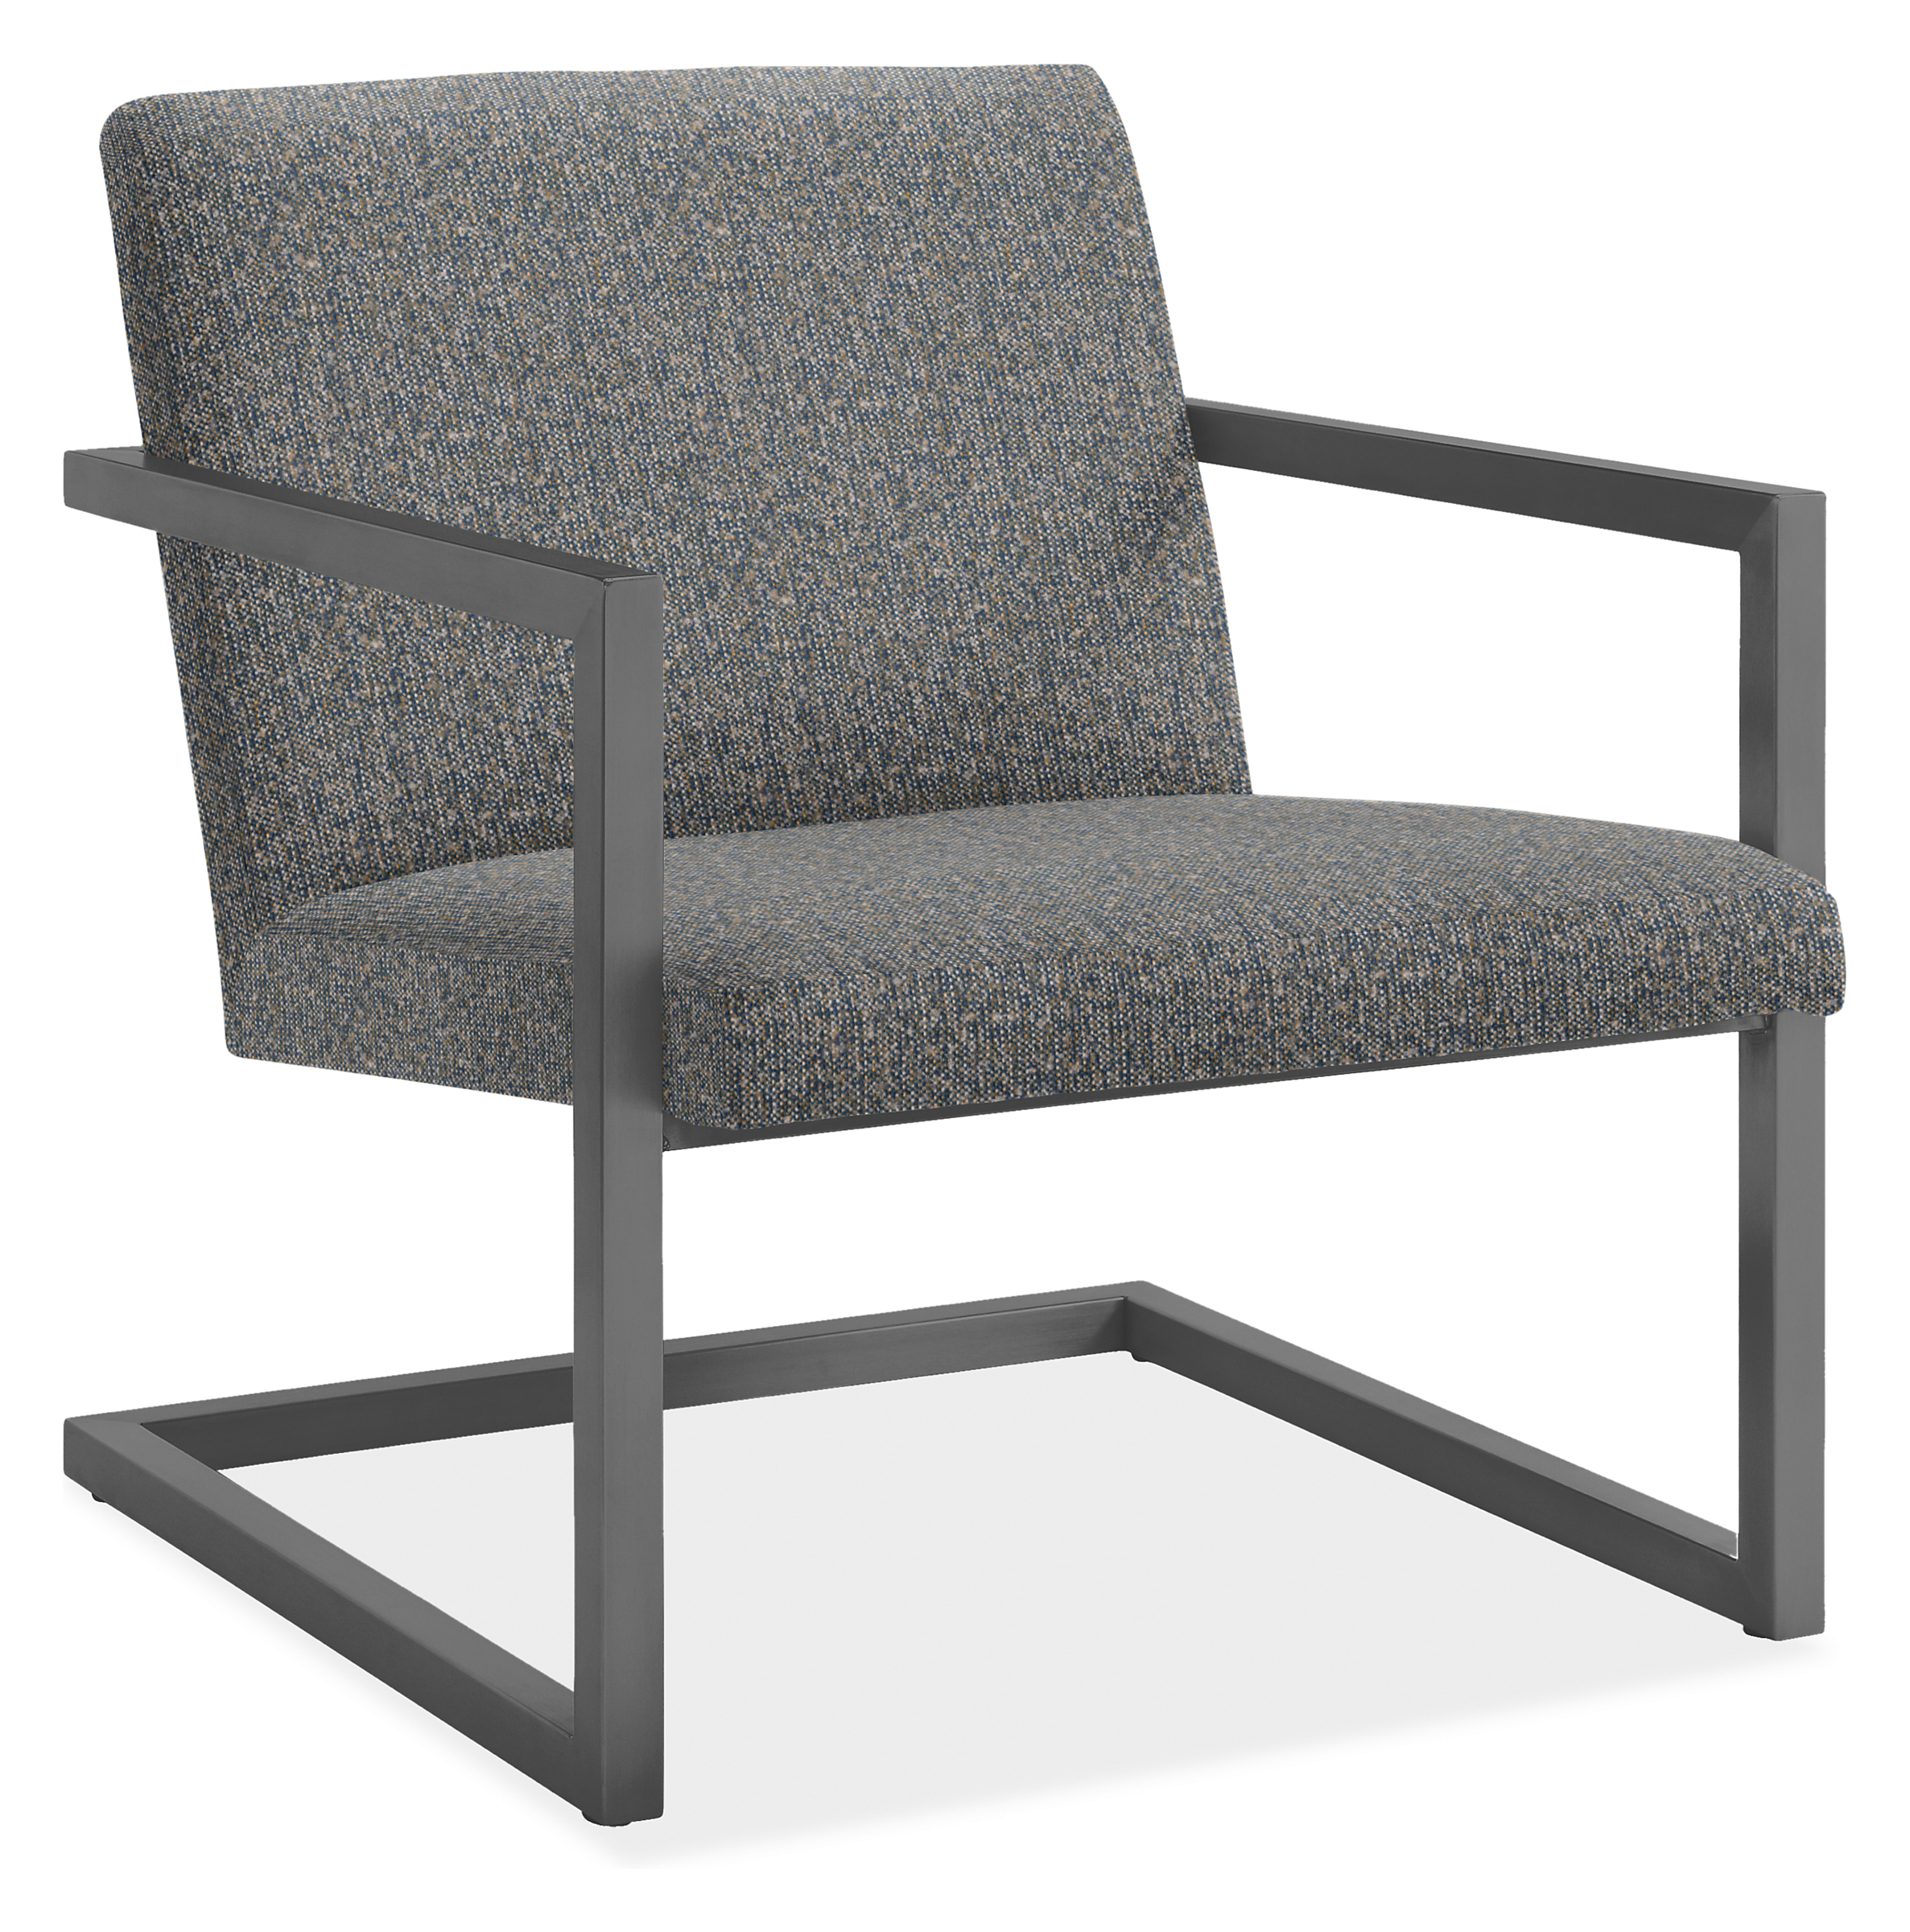 Lira Arm Chair in Conley Navy with Graphite Frame